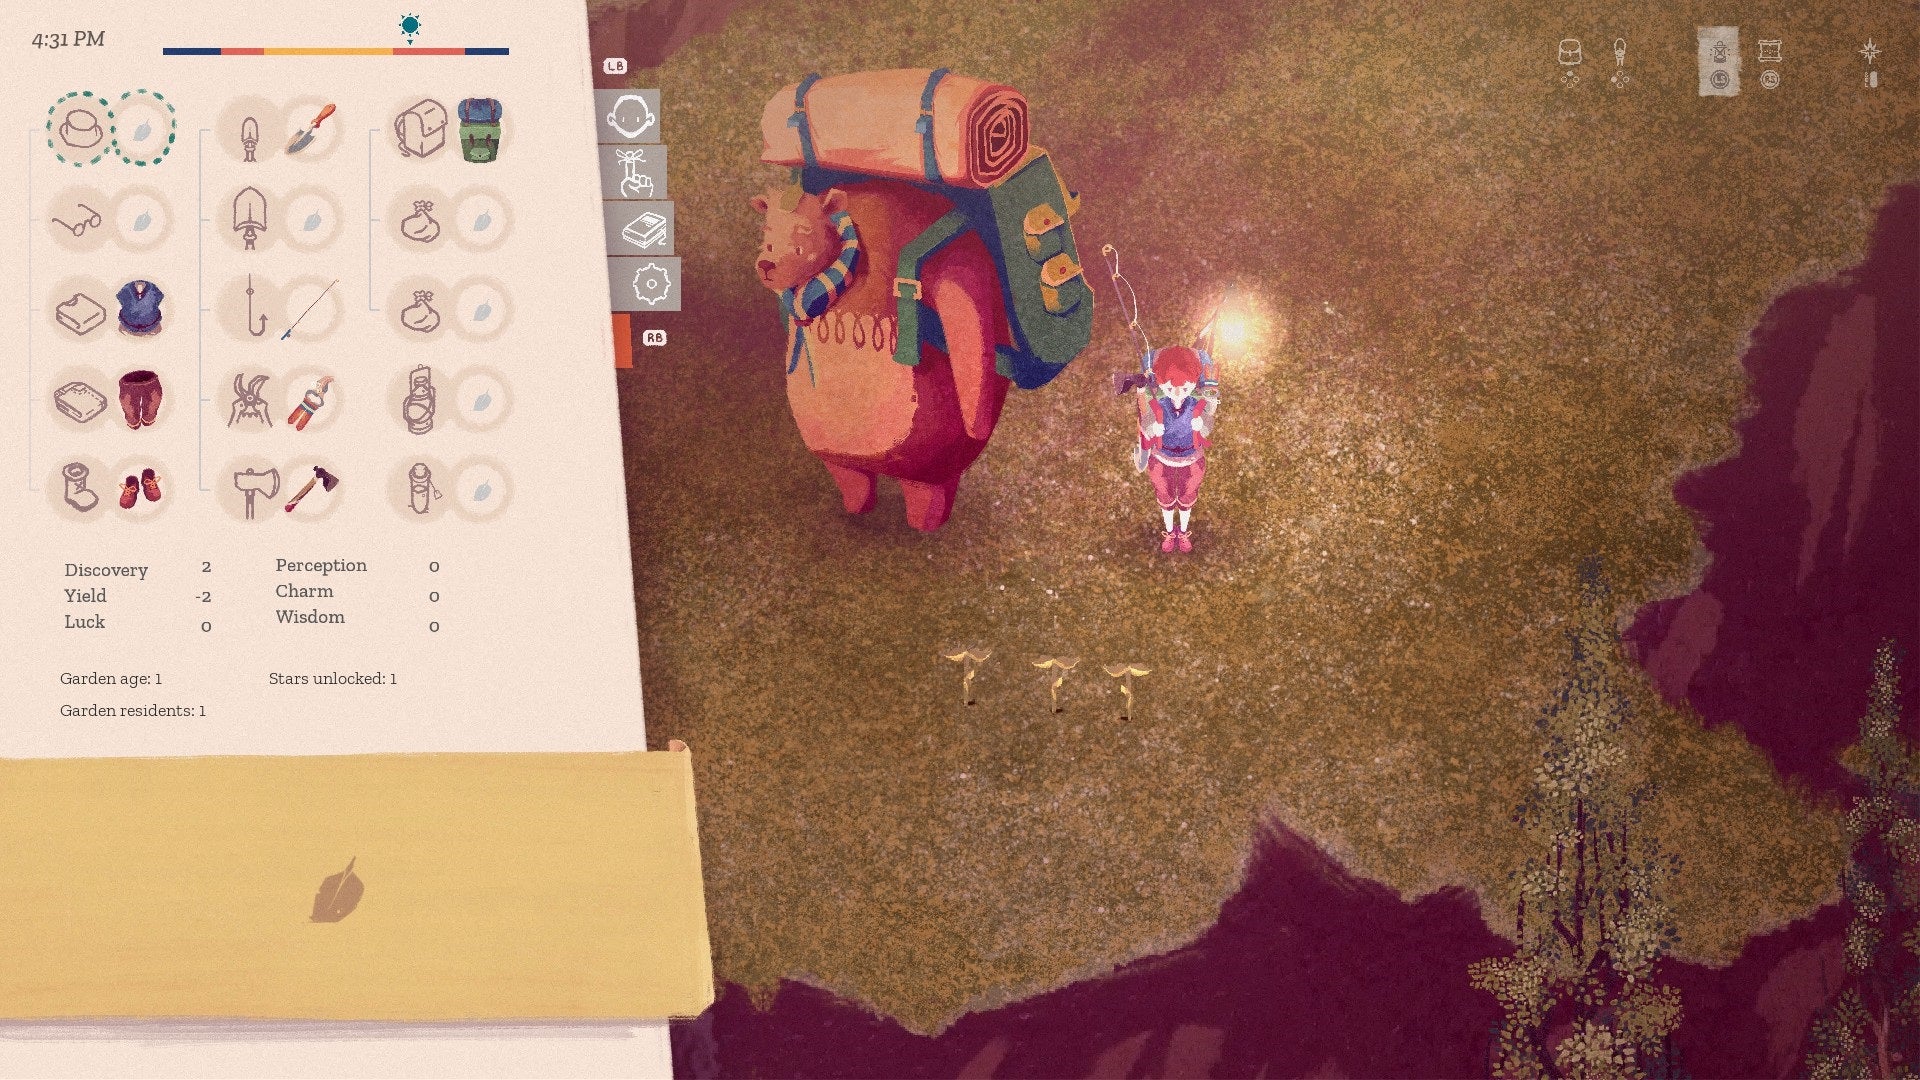 The Garden Path - The player stands beside three planted seeds with a backpack lantern lit next to Augustus the bear while looking at their inventory.